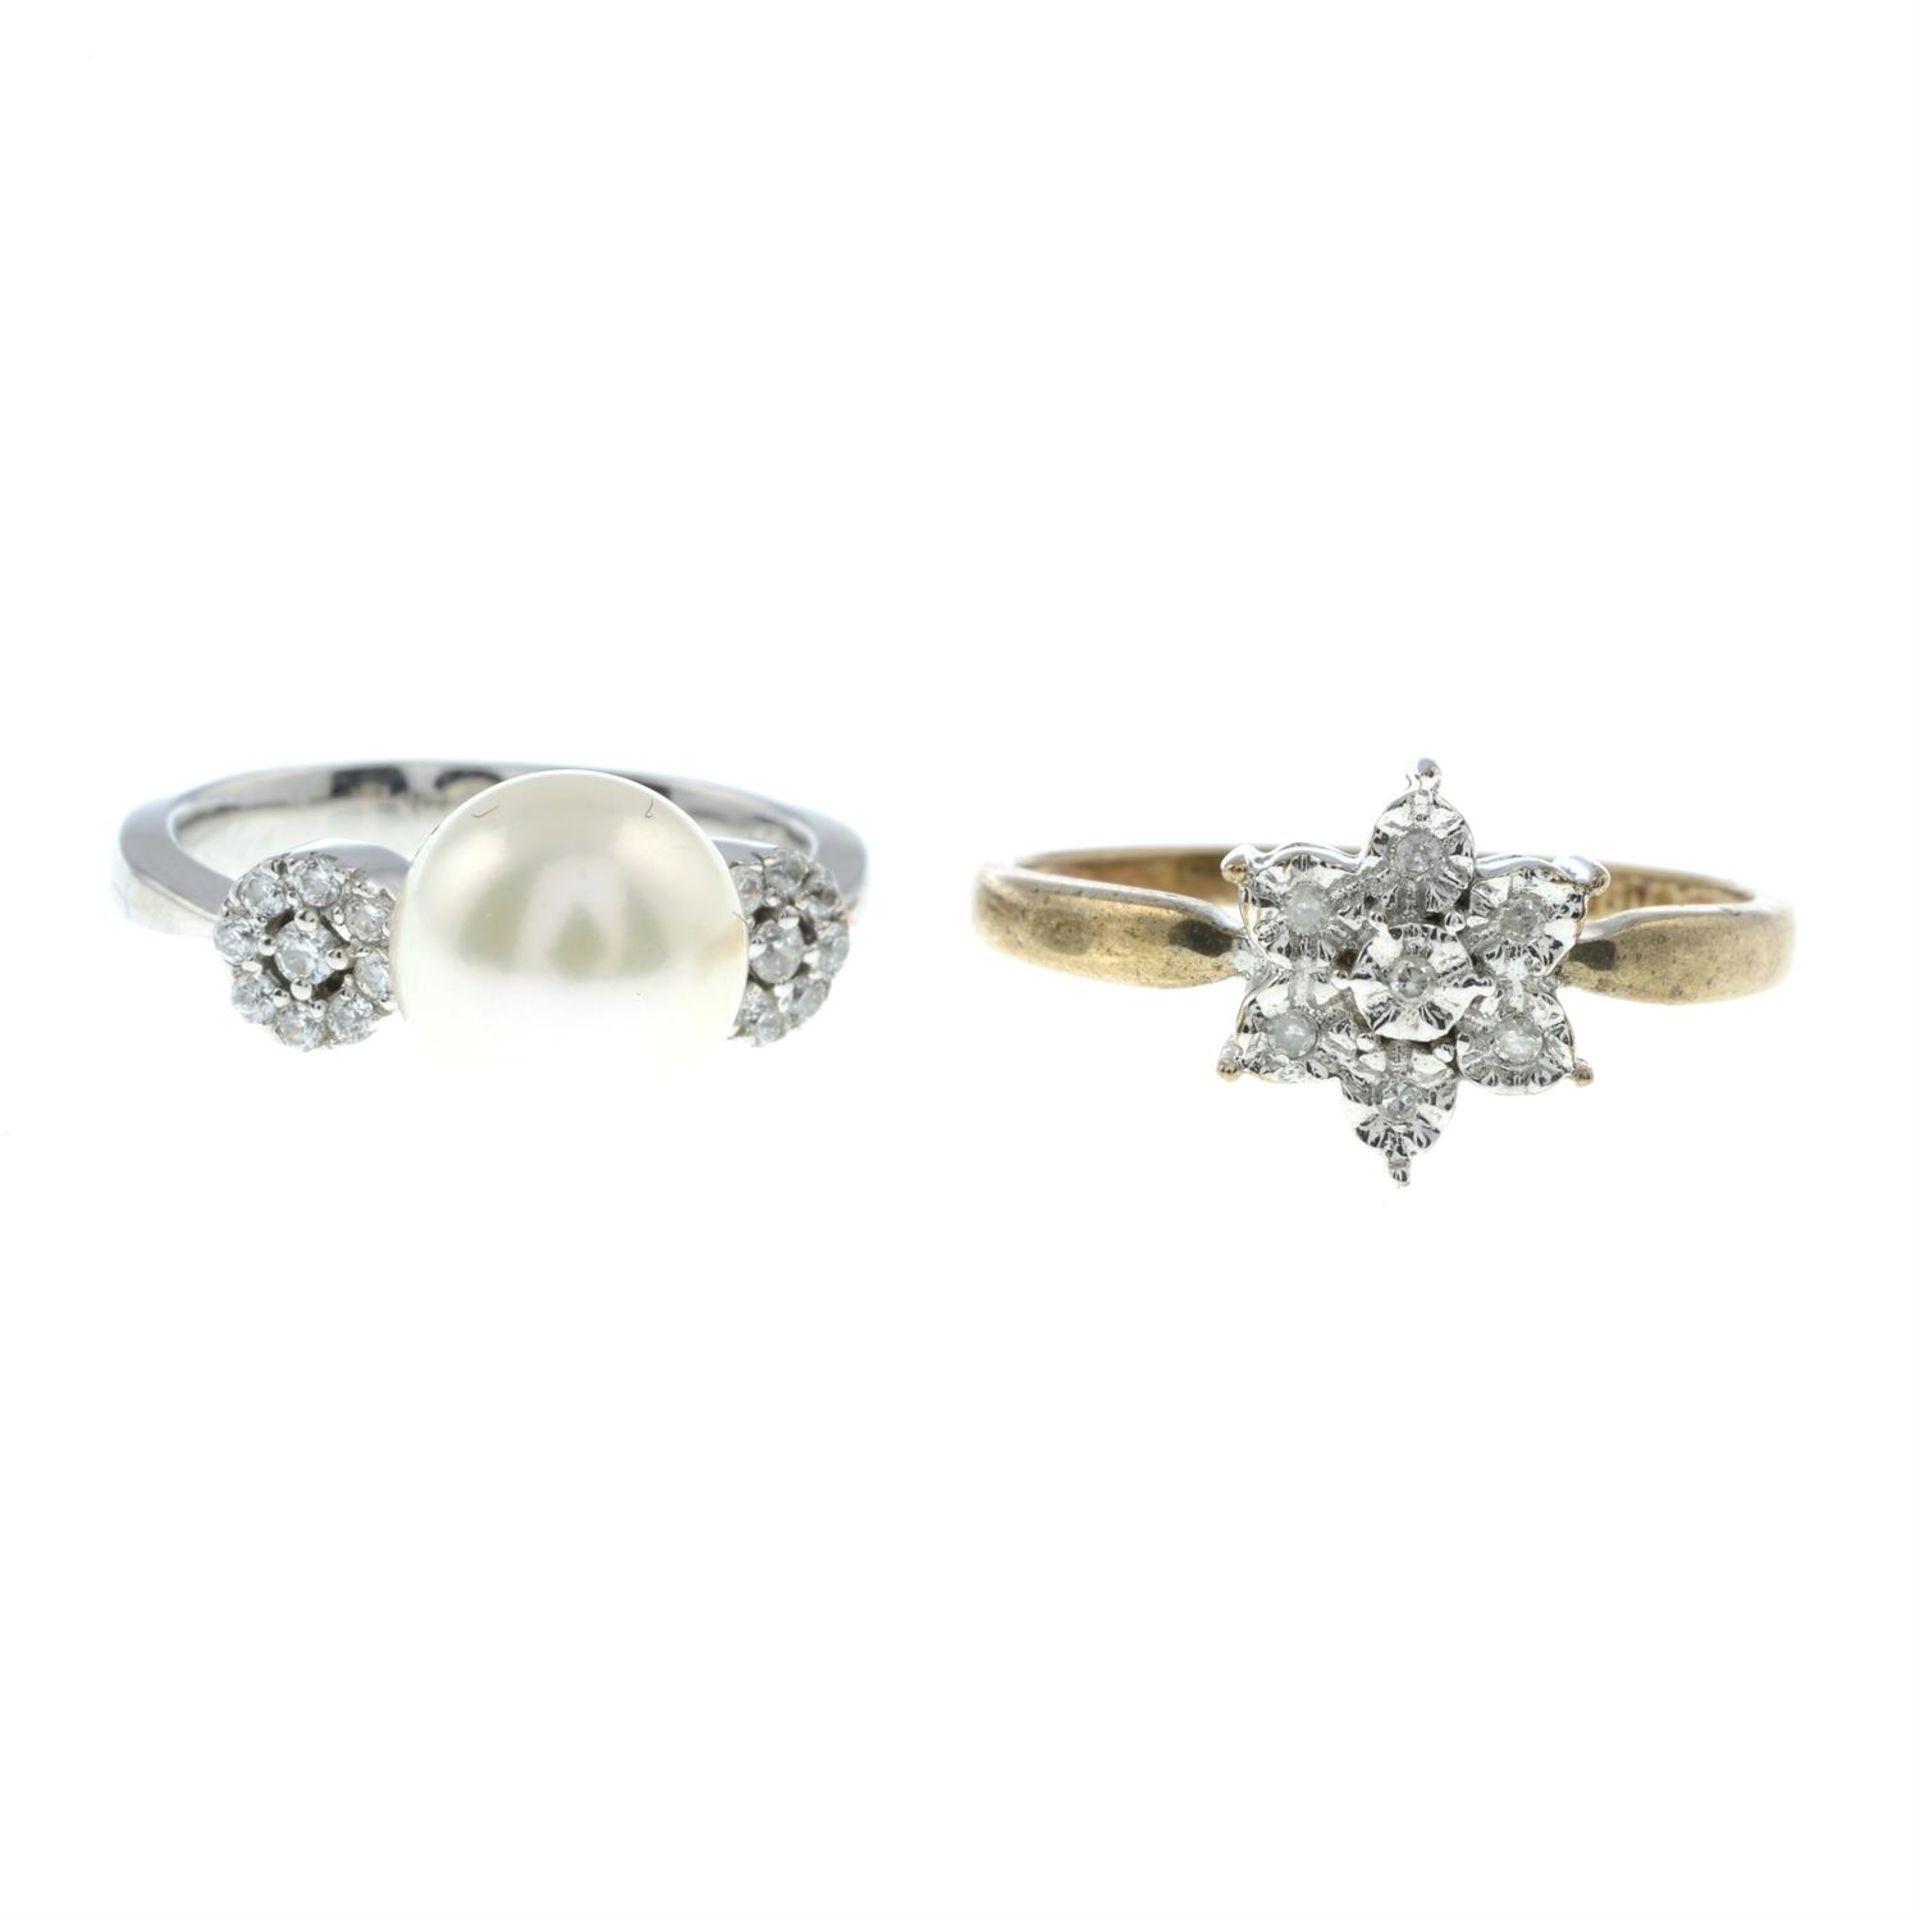 A single-cut diamond floral cluster ring, together with a cubic zirconia and cultured pearl dress